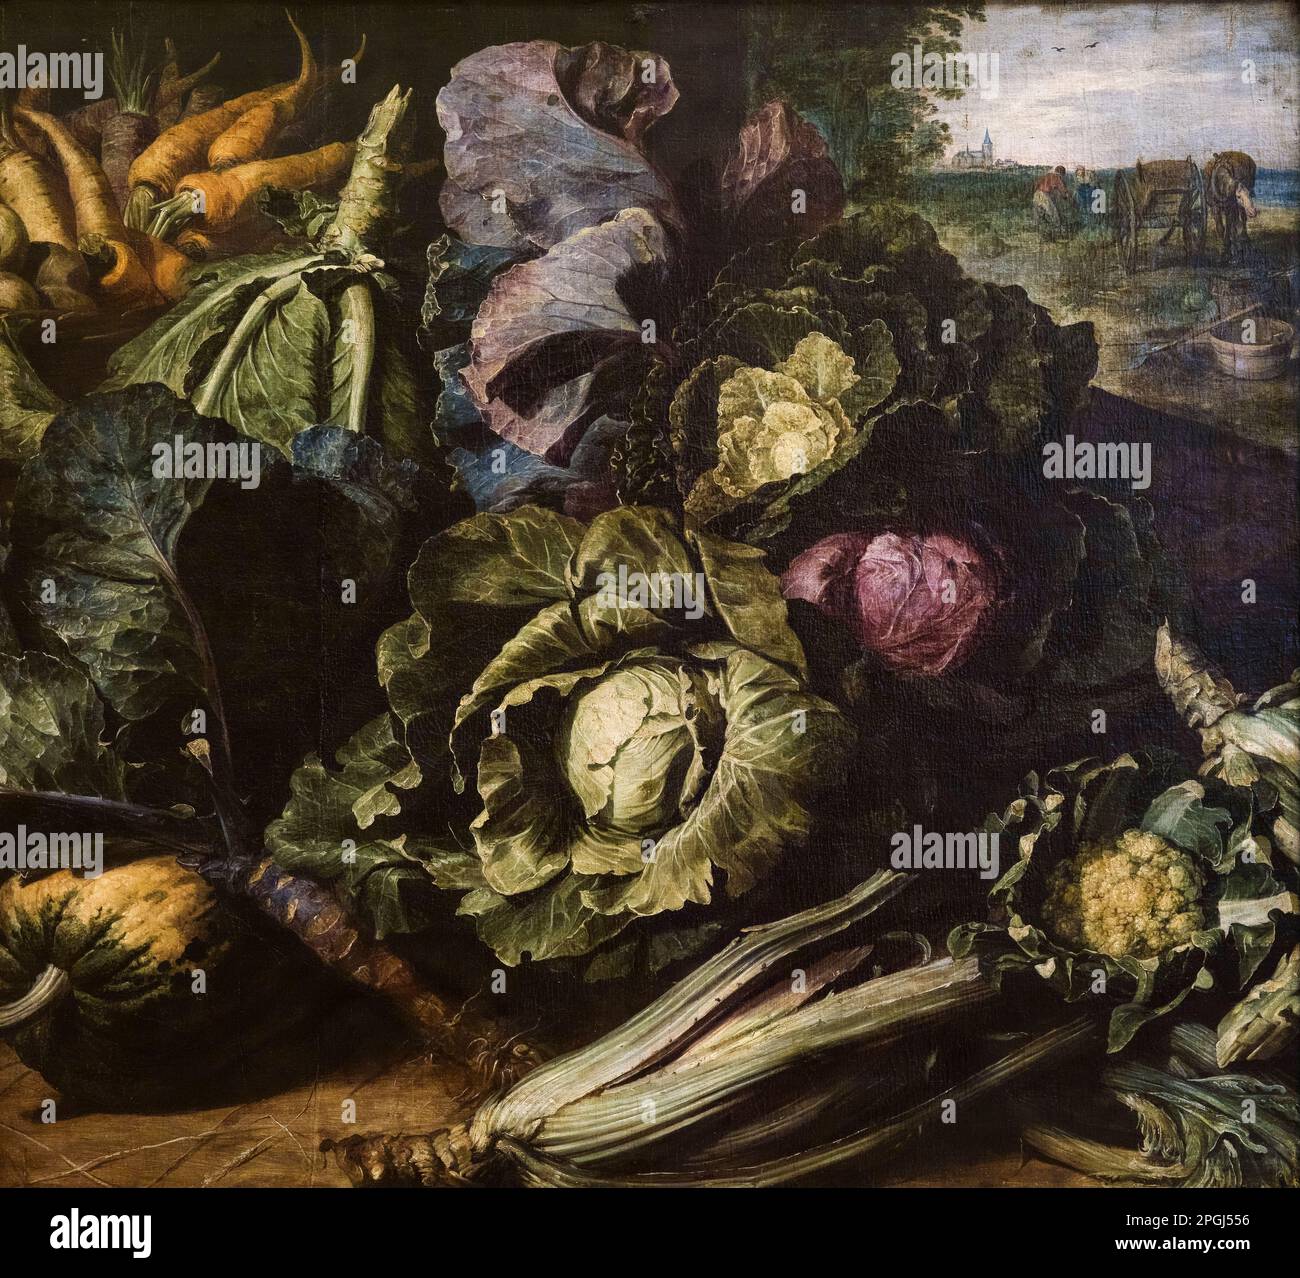 Frans Snyders, Still Life with Crops, (Allegory of the Earth?), Ölmalerei auf Leinwand, 1610 Stockfoto